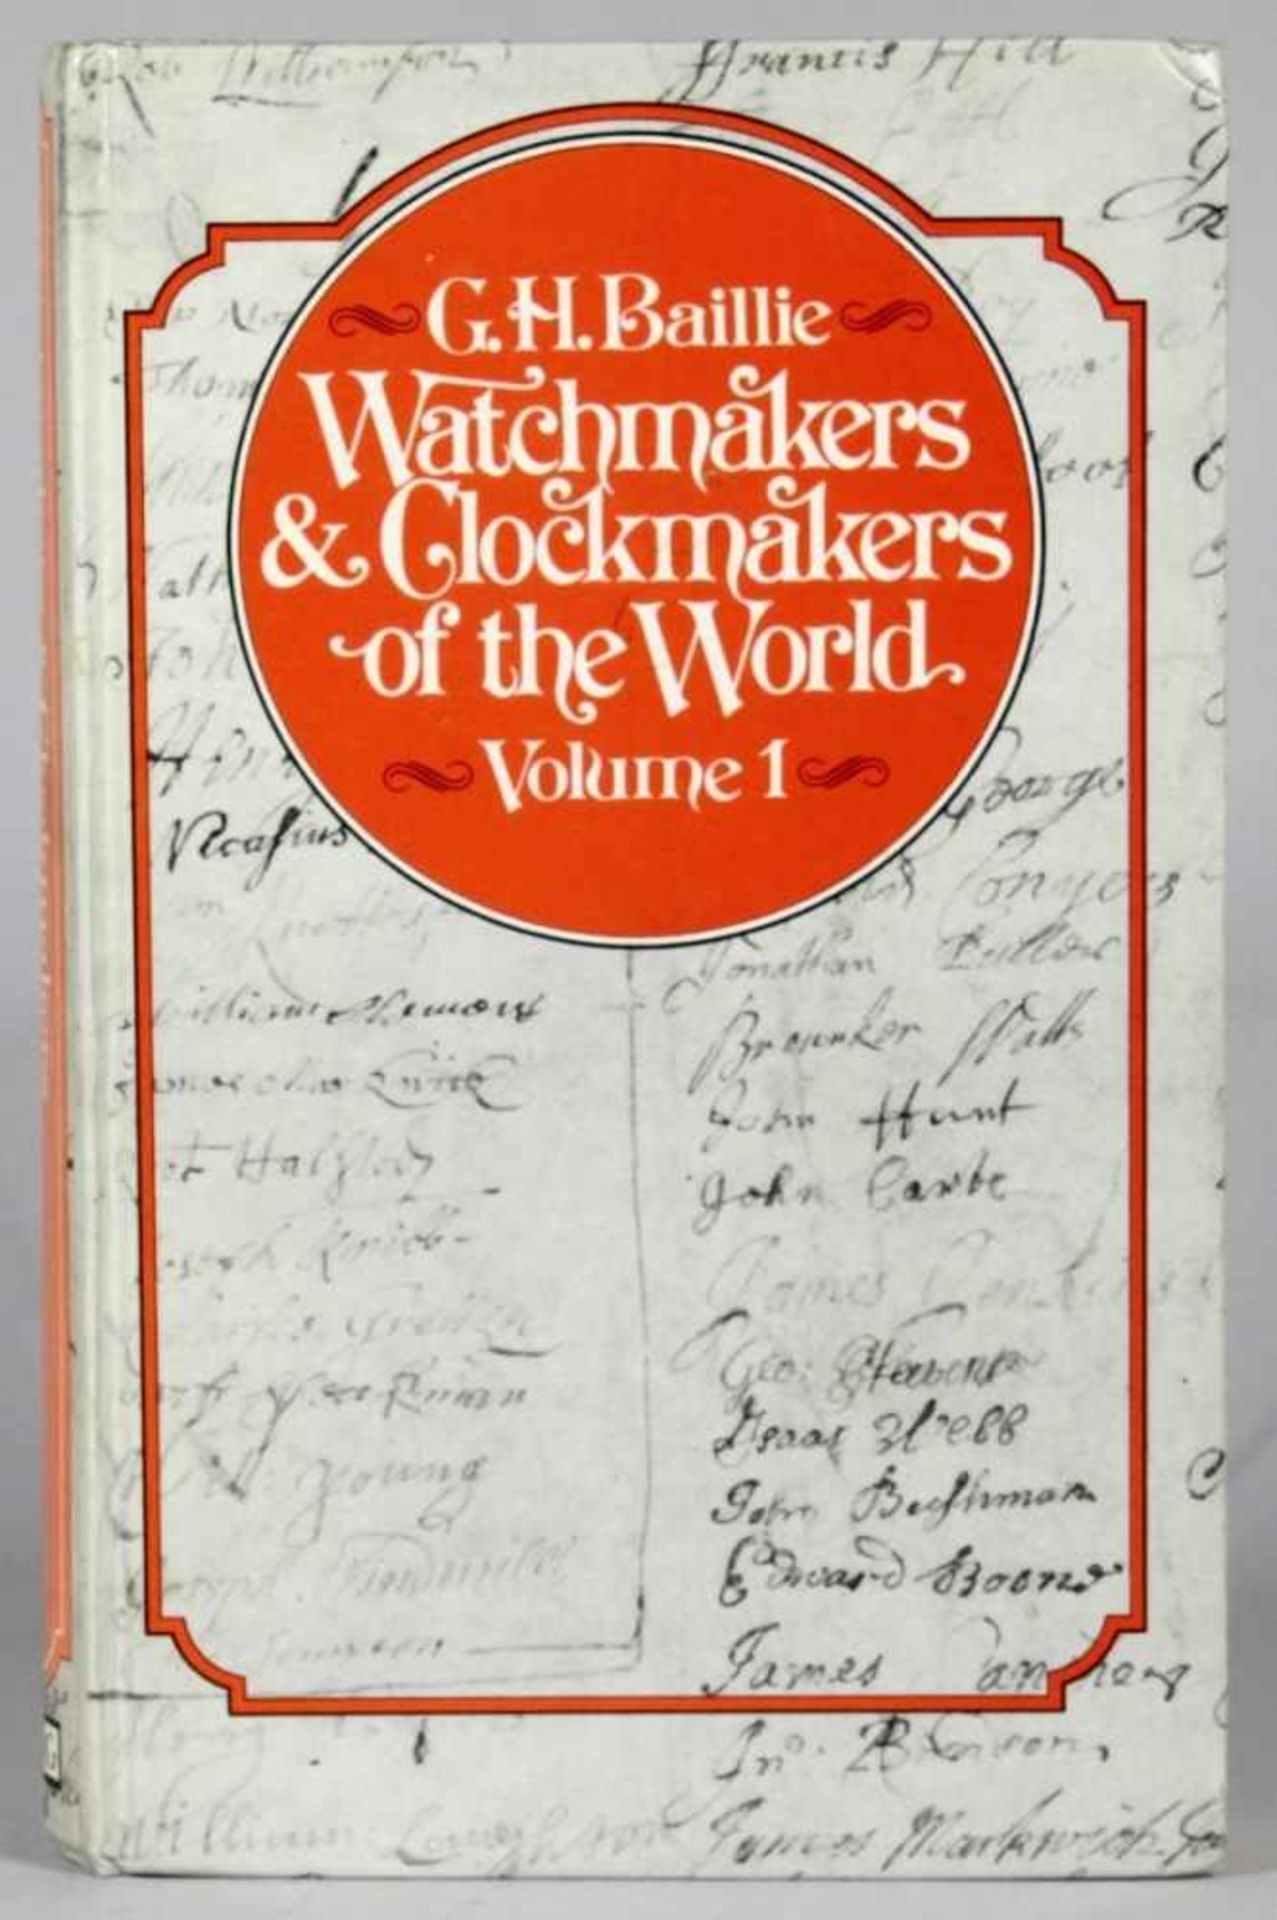 Buch, Watchmakers & Clockmakers of the World Volume 1, C.H. Baillie, London, 1947, in